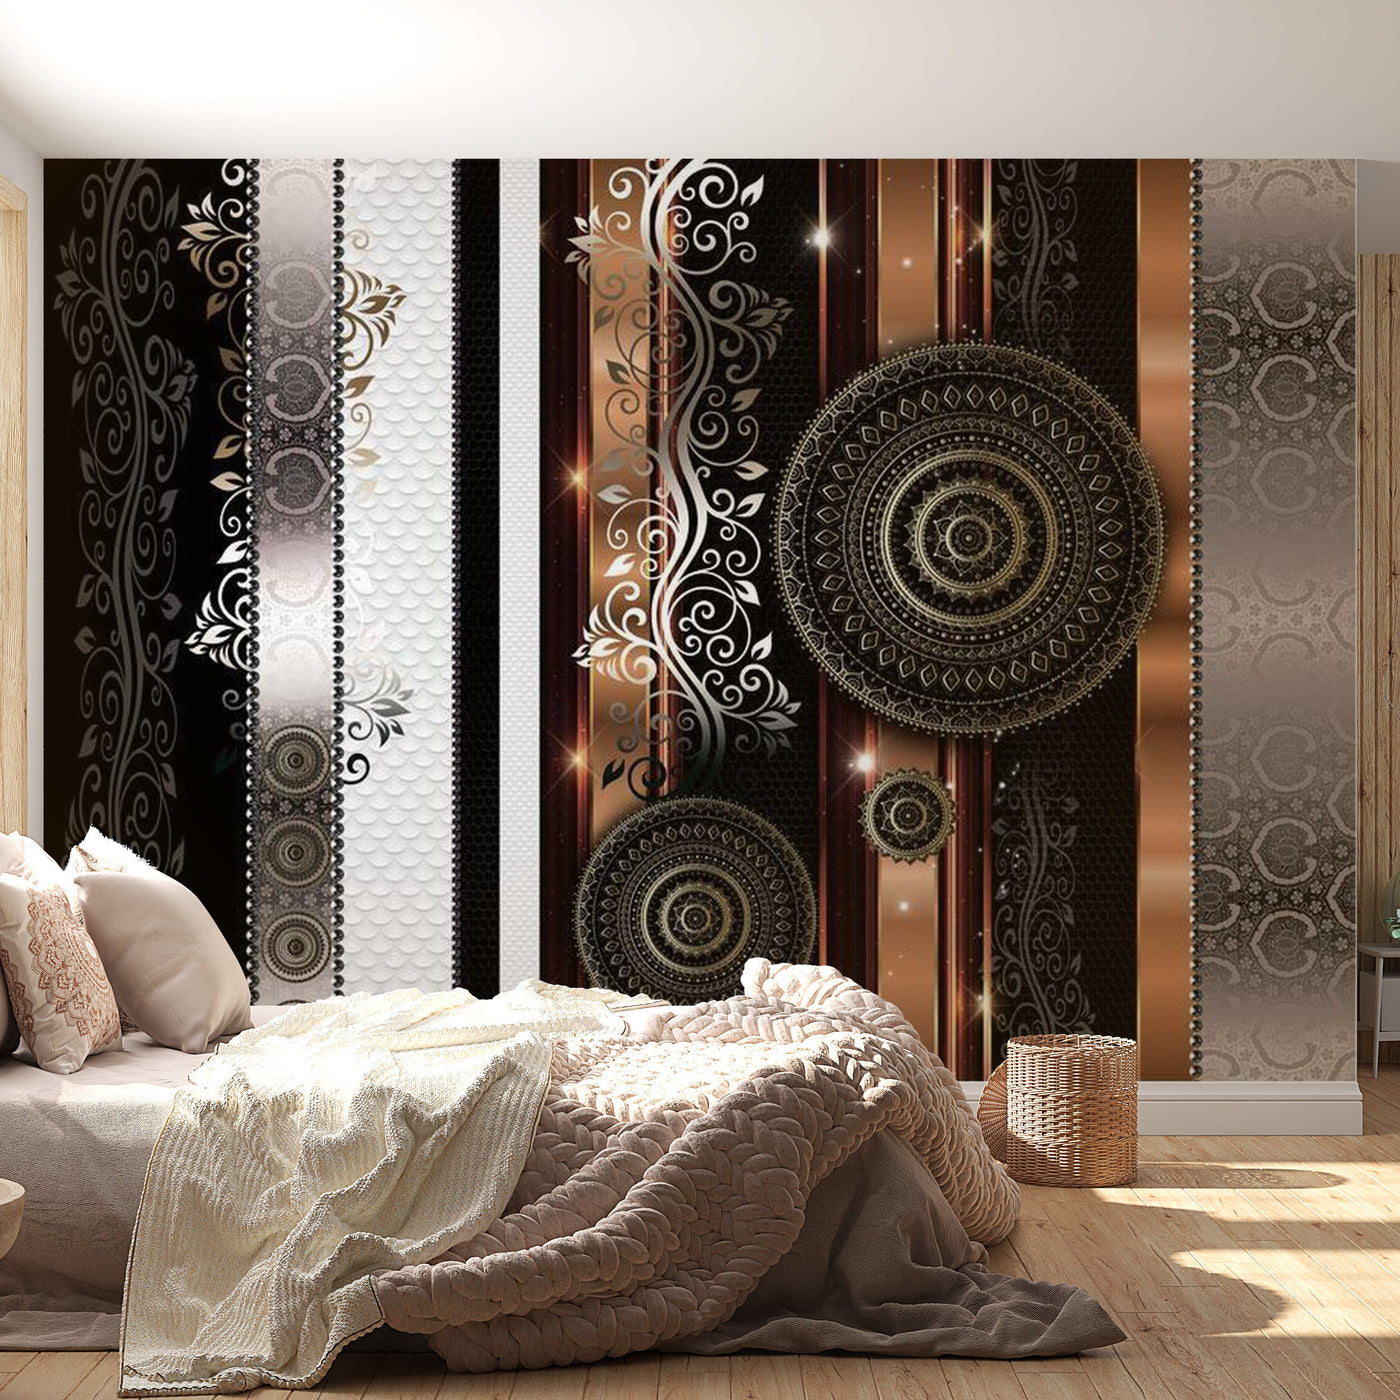 Peel & Stick Glam Wall Mural - Gold Harmony - Removable Wall Decals